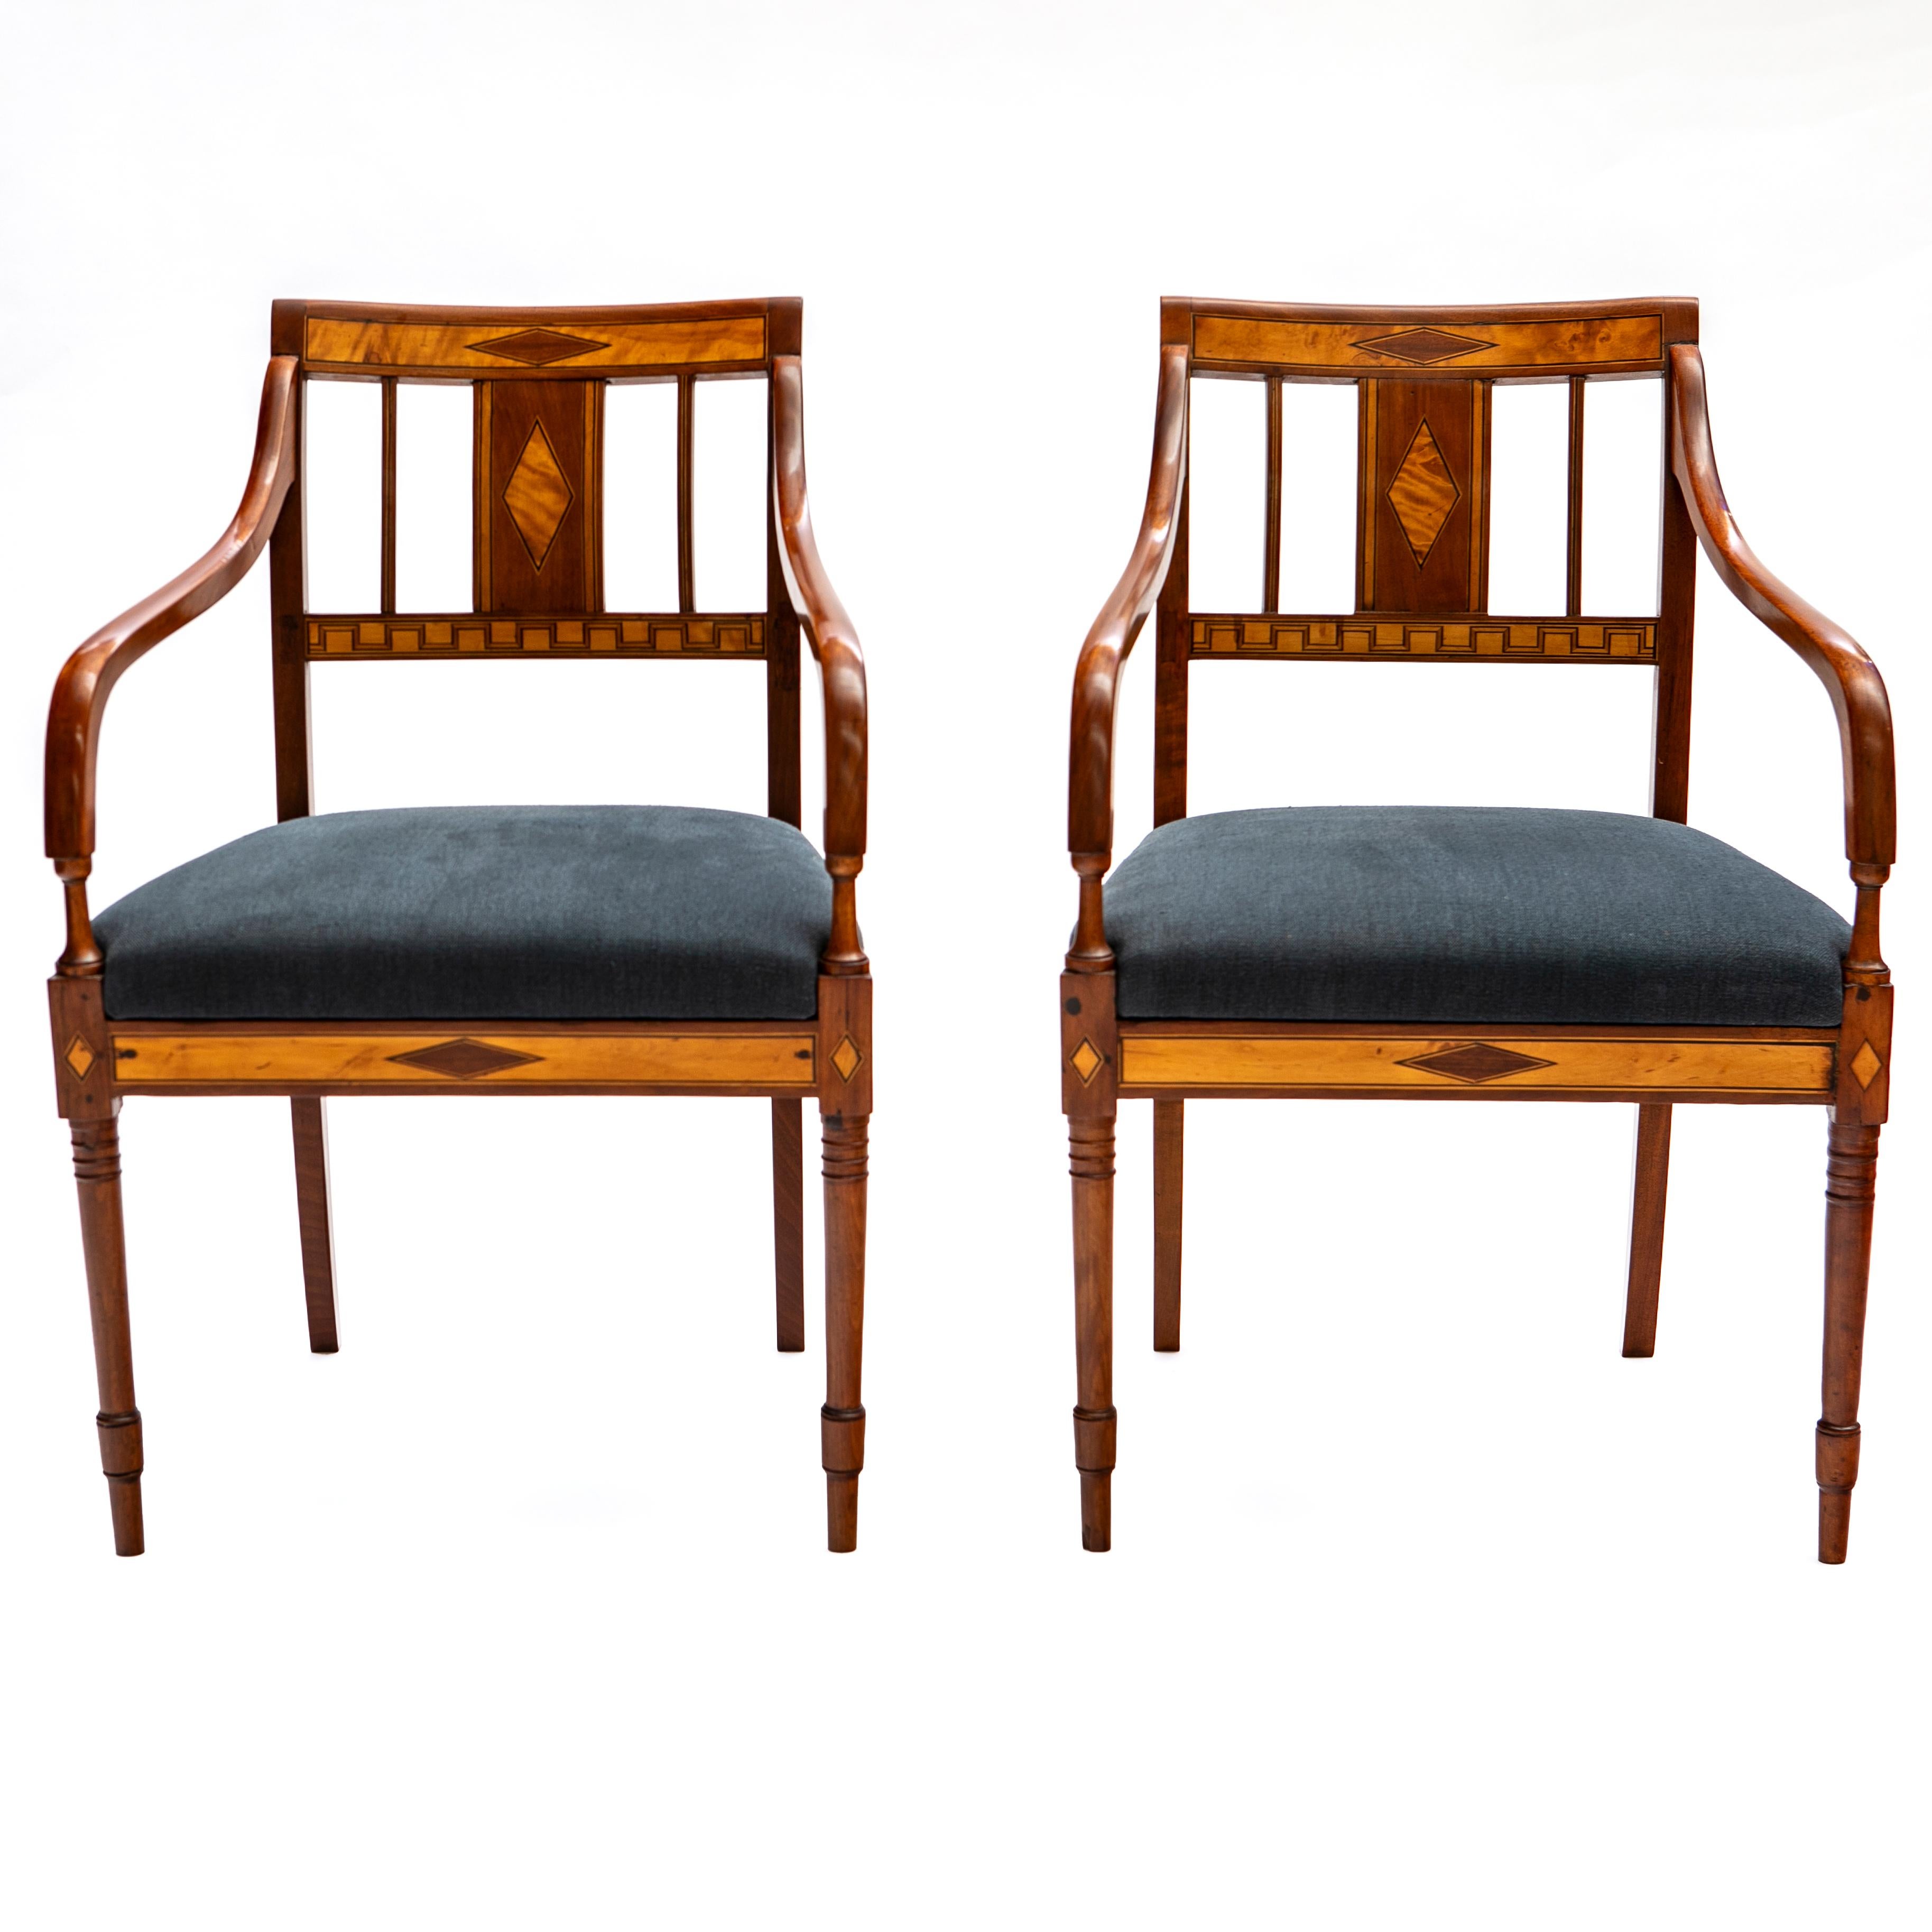 A pair of elegant Danish early 19th century empire armchairs.
Crafted in mahogany with ebony and satinwood marquetry on backrest and apron.
Apron and upper part of backrest decorated with diamond-shaped inlays. Lower part of backrest decorated with